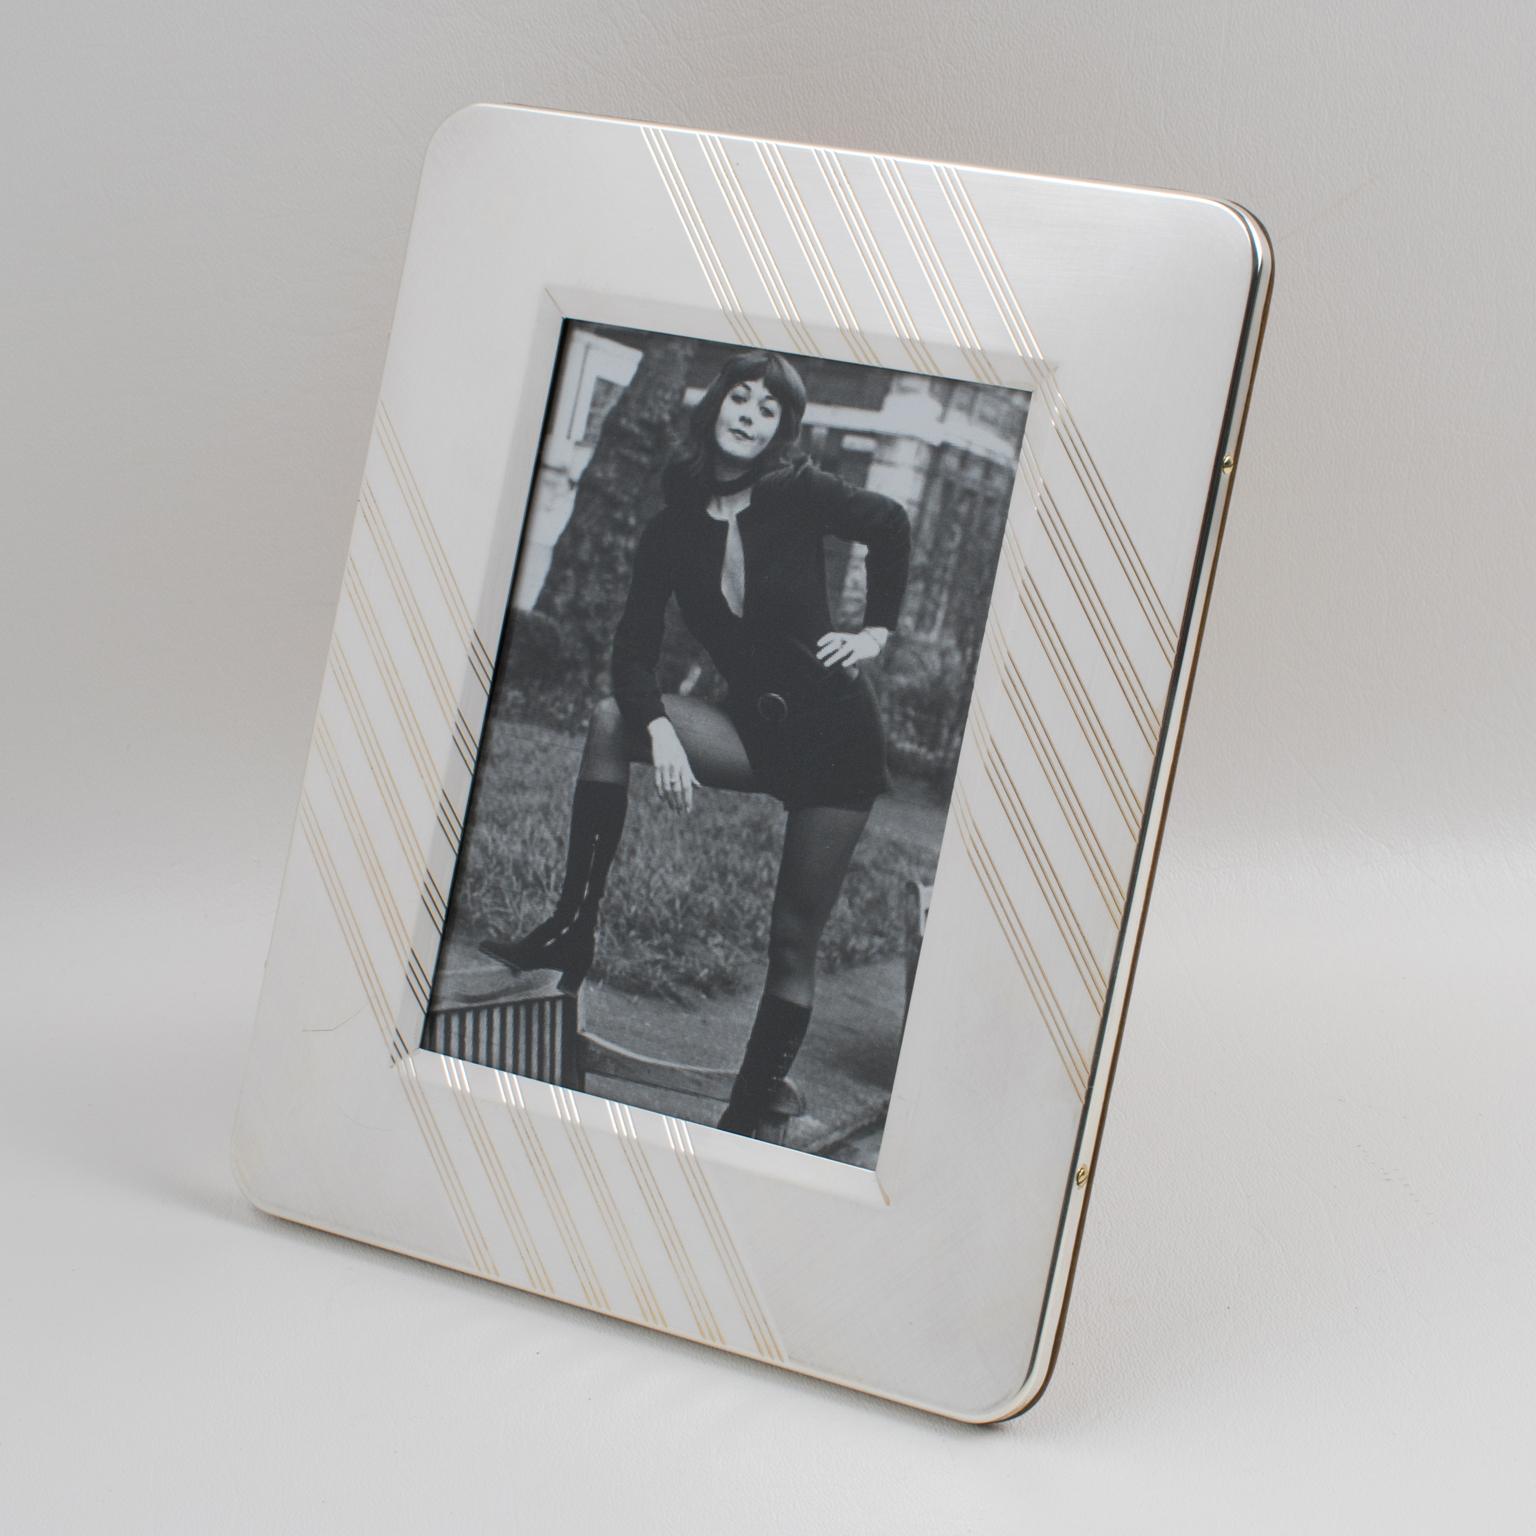 Lovely Italian silver plate picture photo frame. A timeless polished silverplate metal with striped pattern. Rich high gloss wood back and easel. Marked on the side 